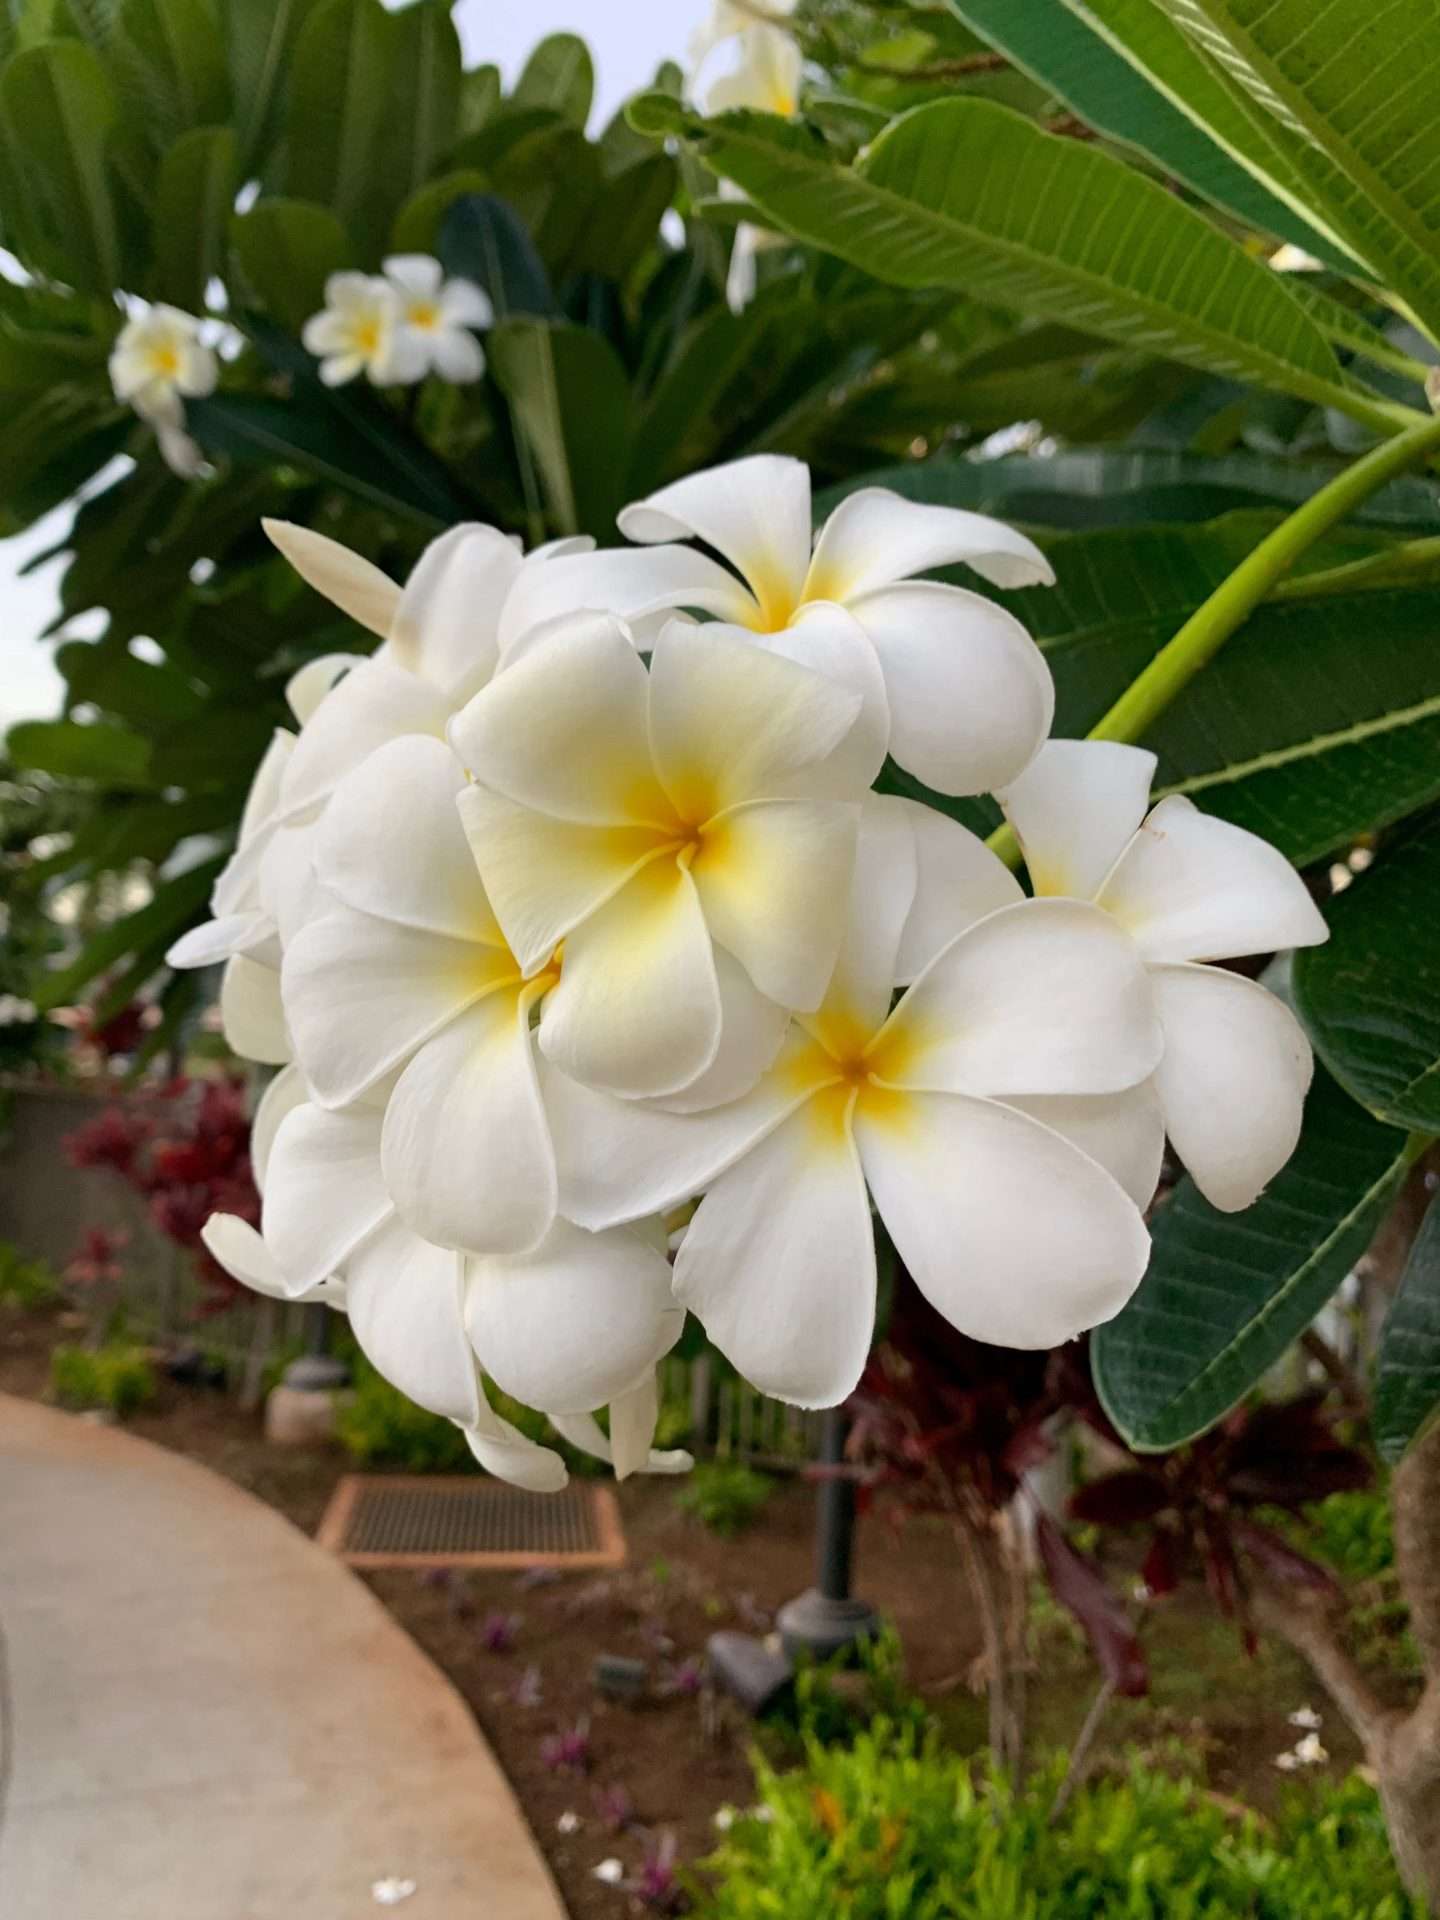 We loved seeing all the beautiful flowers and plants in Hawaii.